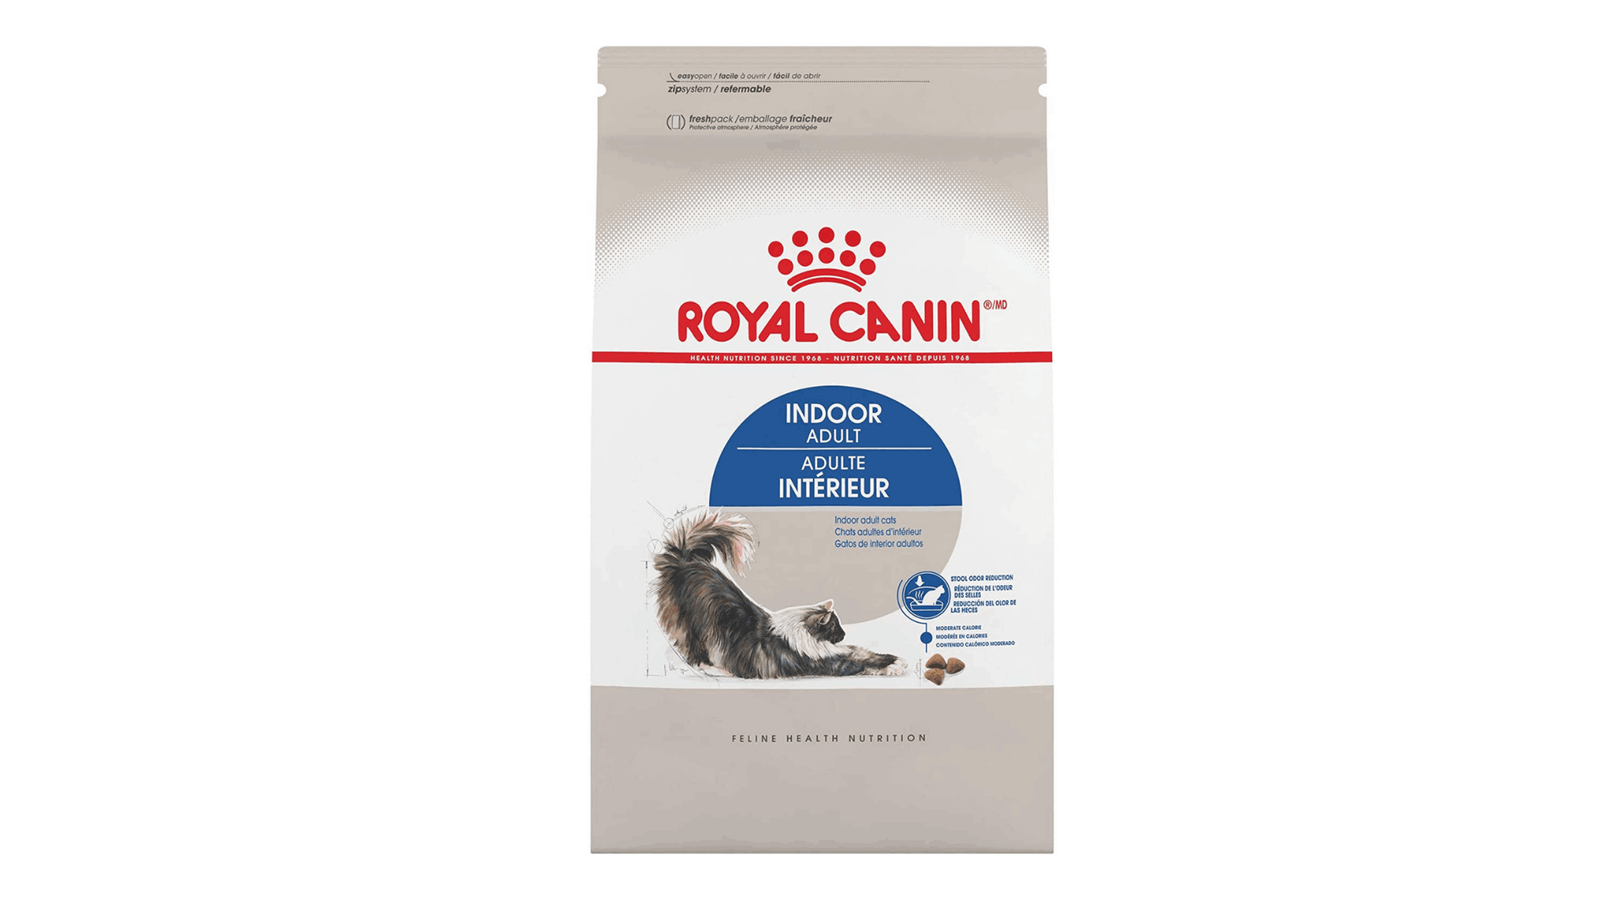 Royal Canin indoor cat foods